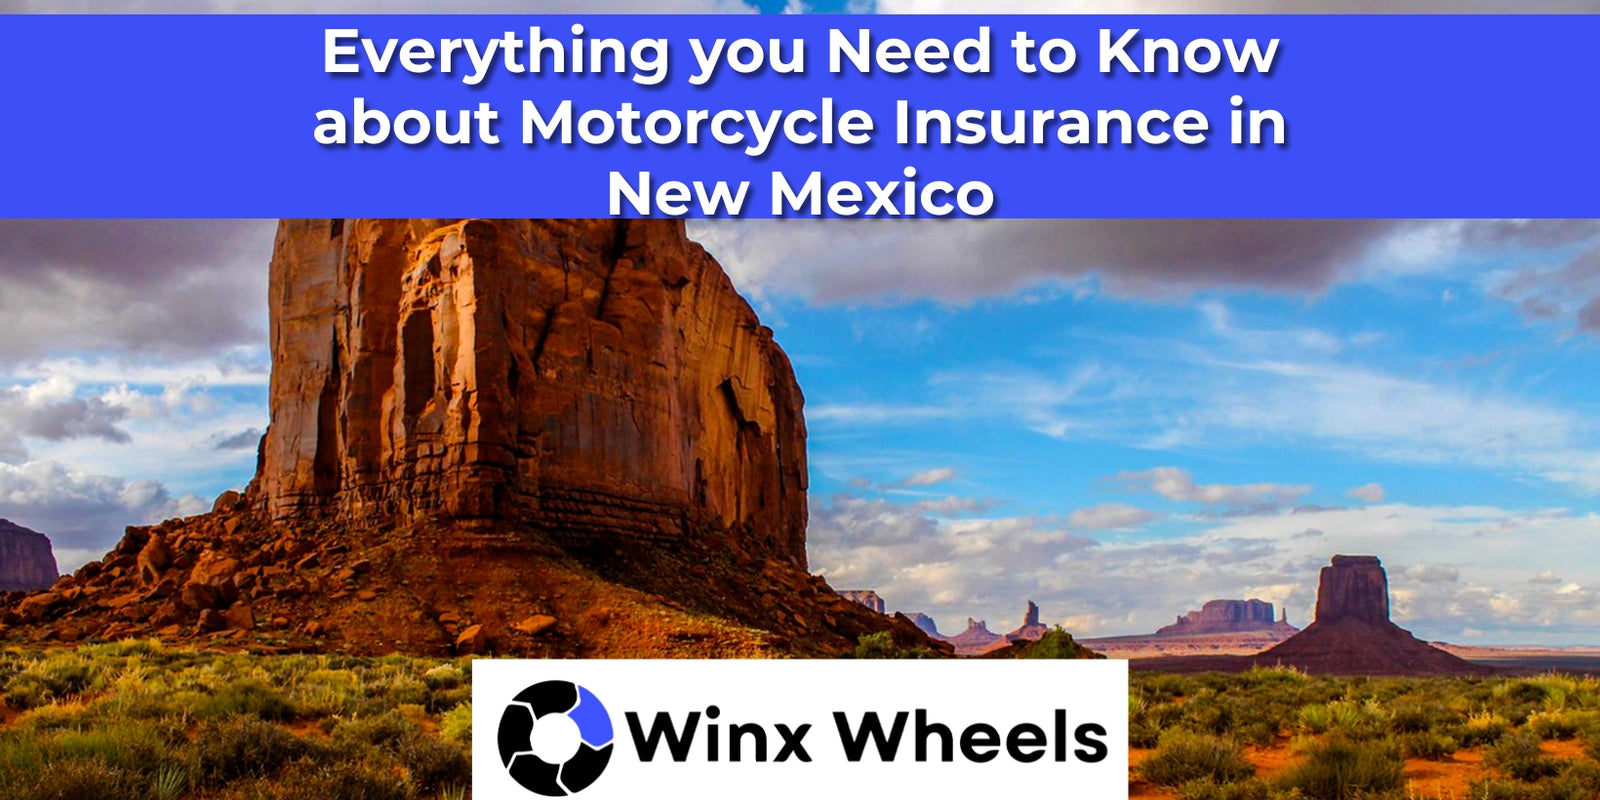 Everything you Need to Know about Motorcycle Insurance in New Mexico